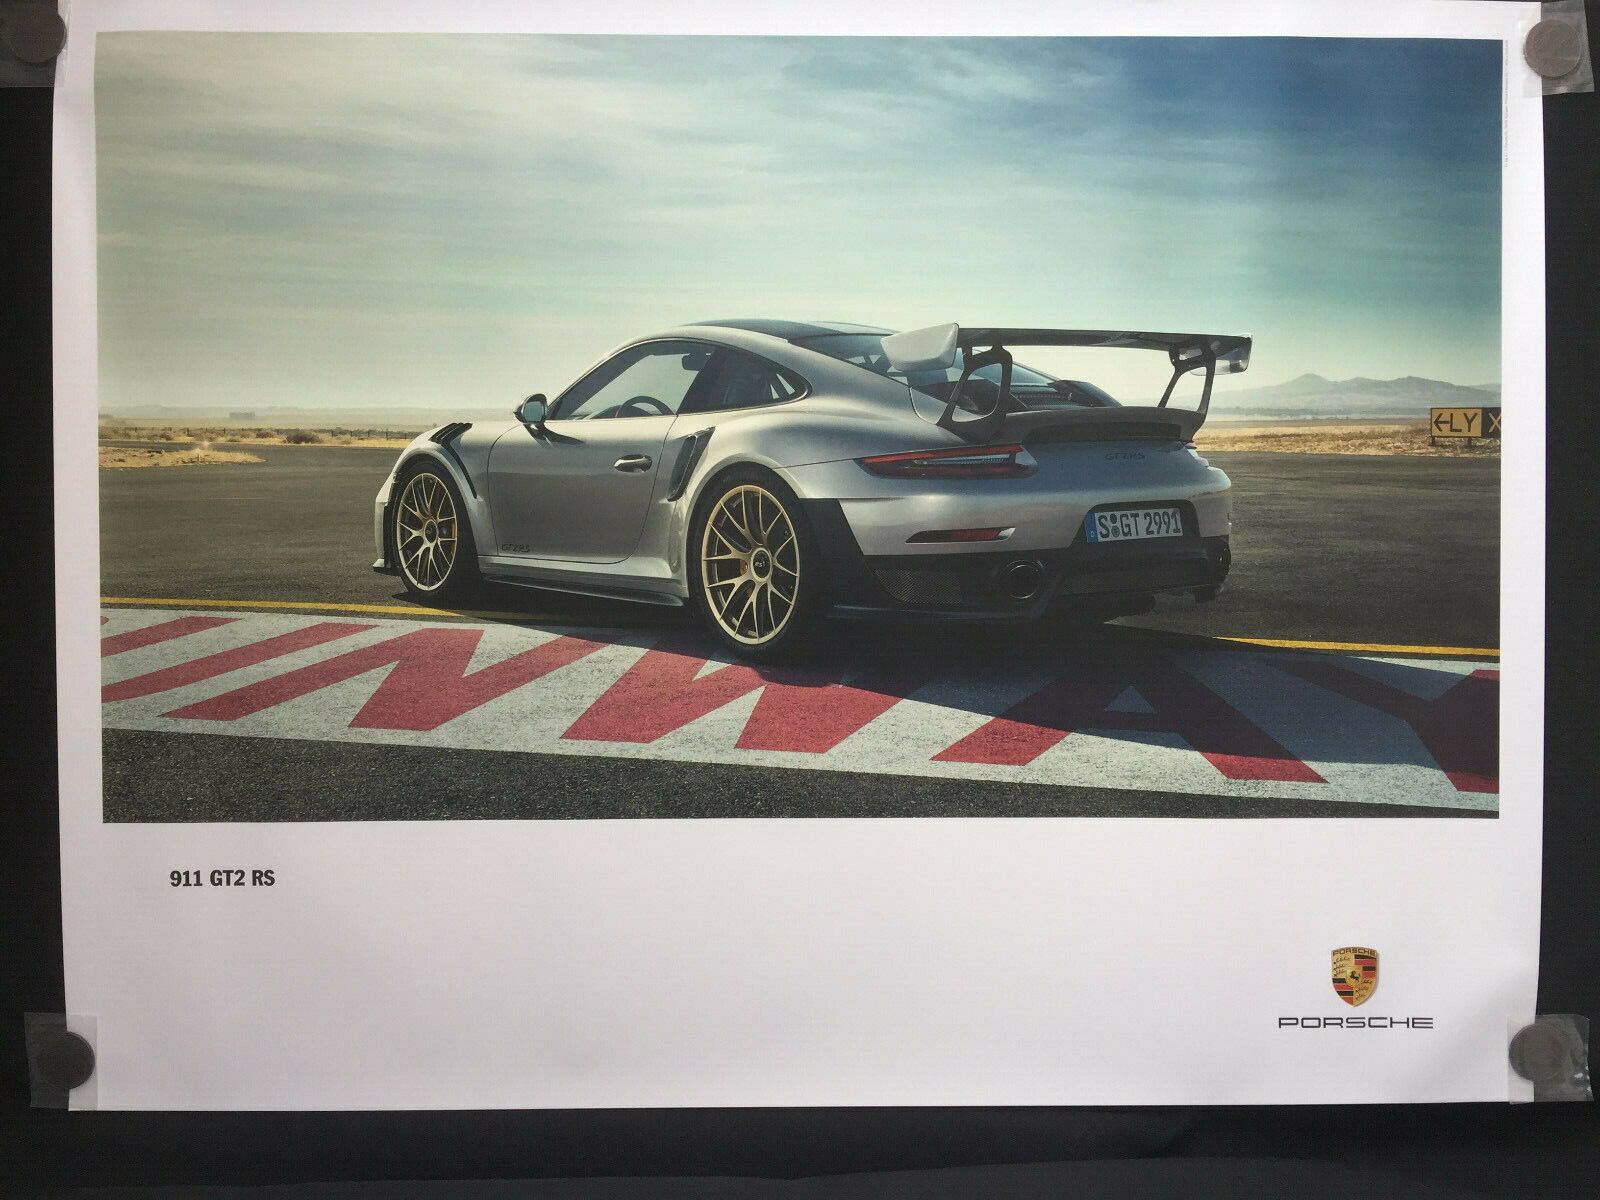 PORSCHE OFFICIAL 991 911 GT2 RS SHOWROOM POSTER REAR 3/4 VIEW PARKED 2018.